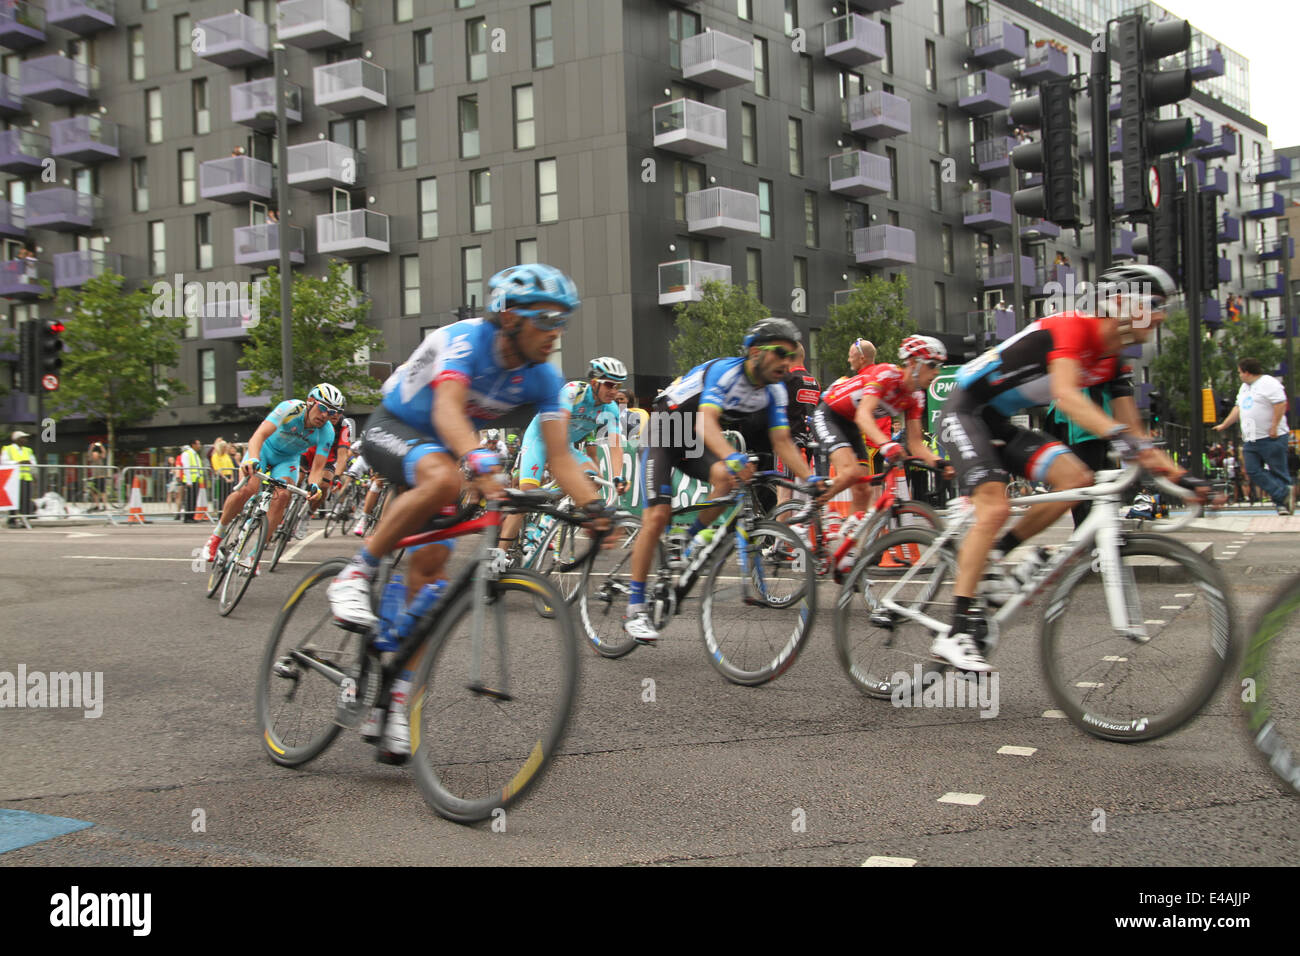 London, UK. 07th July, 2014. London, UK. 07th July, 2014. Rides make their way through Stratford High Street and onto West Ham Lane on Stage 3 of the Tour de France via Newham. Credit:  © david mbiyu/Alamy Live News Credit:  david mbiyu/Alamy Live News Stock Photo